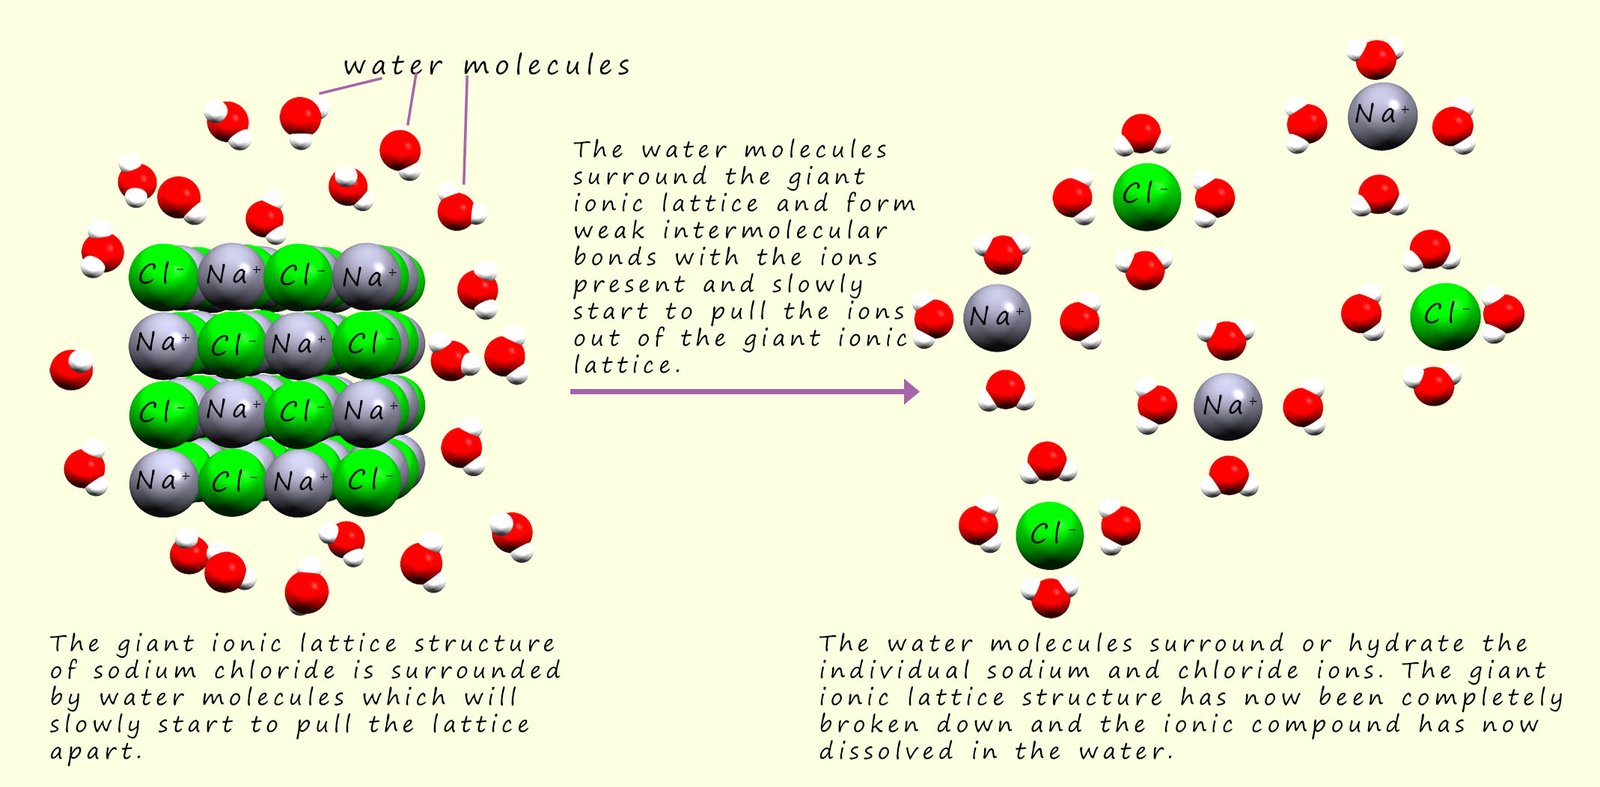 sodium chloride lattice structure being solvated by water molecules, the sodium and chloride ions are pulled from the giant ionic lattice by the water molecules.